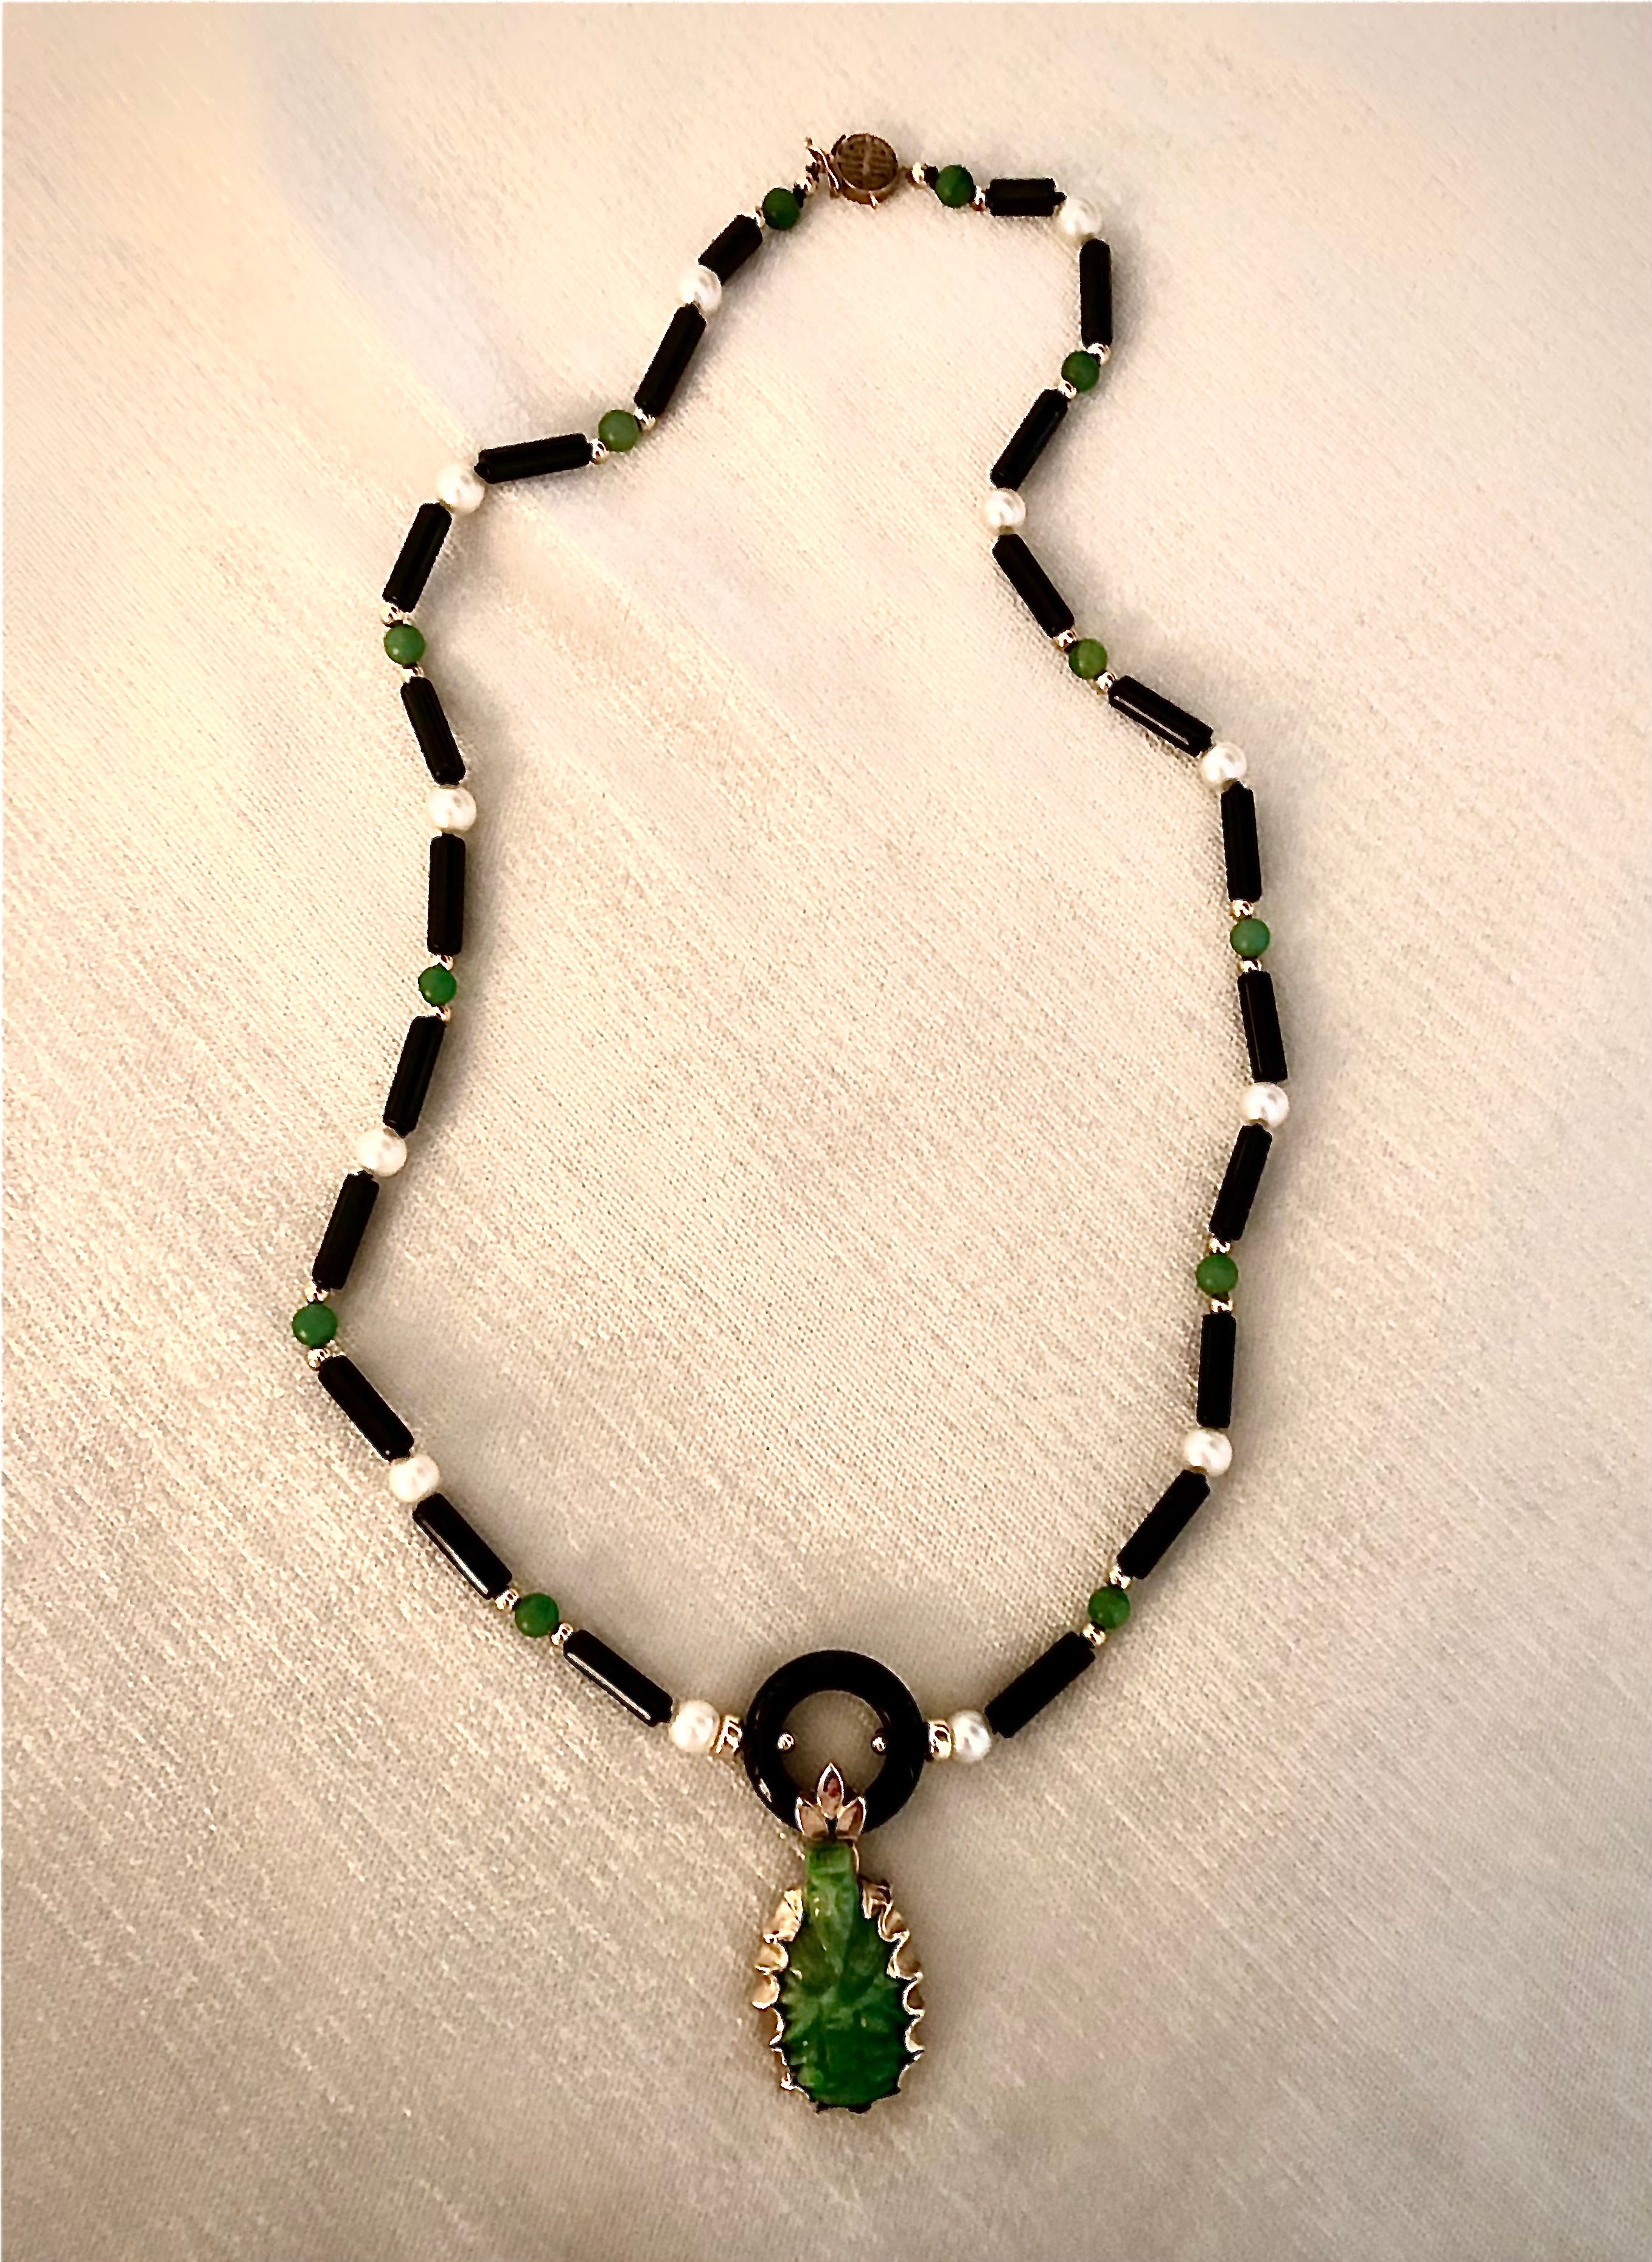 Black onyx, green jade and 14kt gold necklace